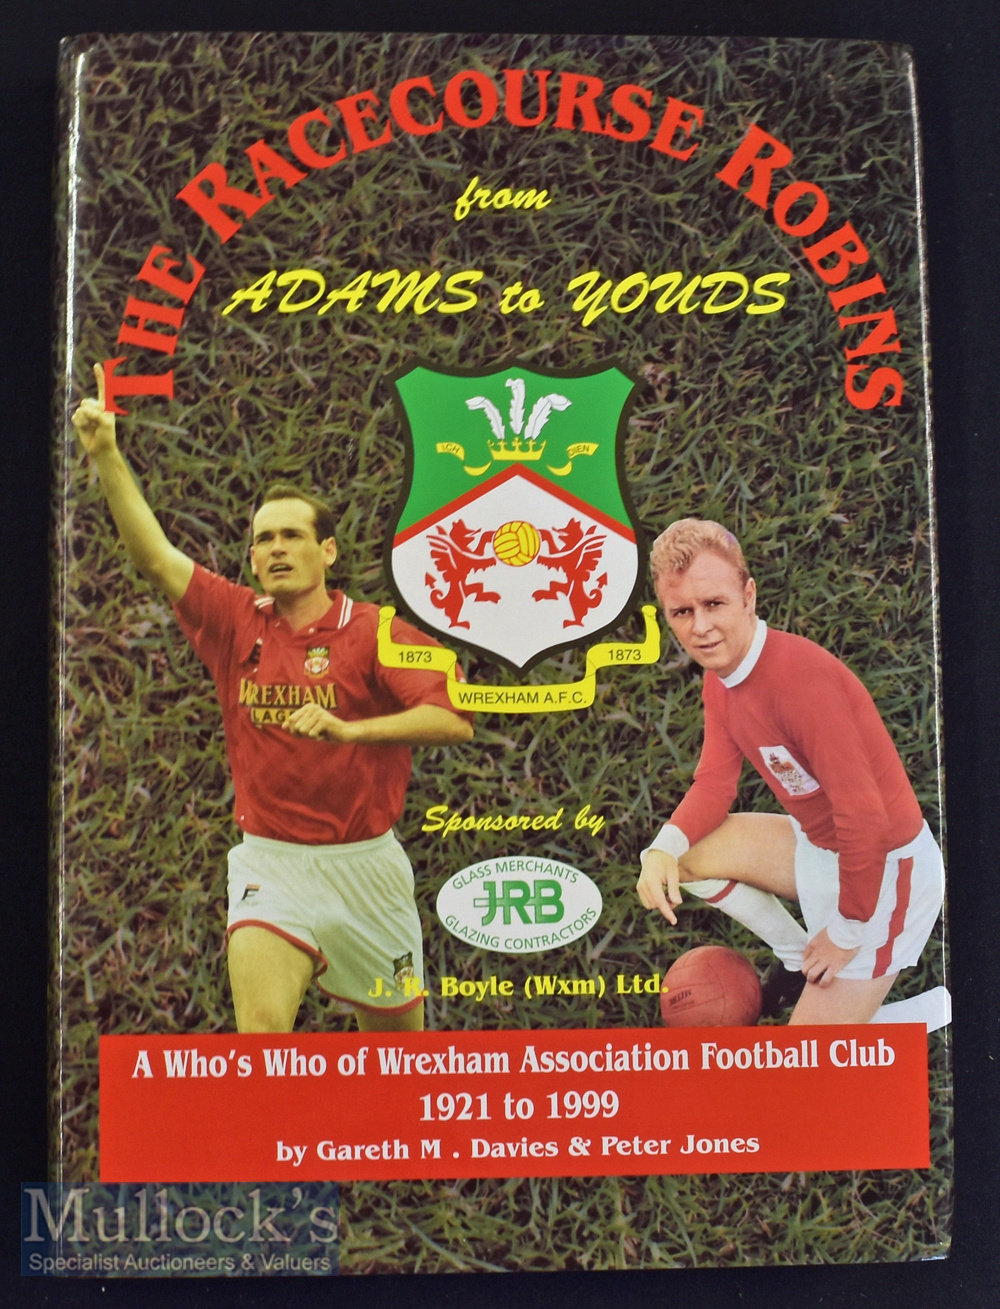 The Racecourse Robins Book A Who’s Who of Wrexham Association Football Club 1921 to 1999 HB with